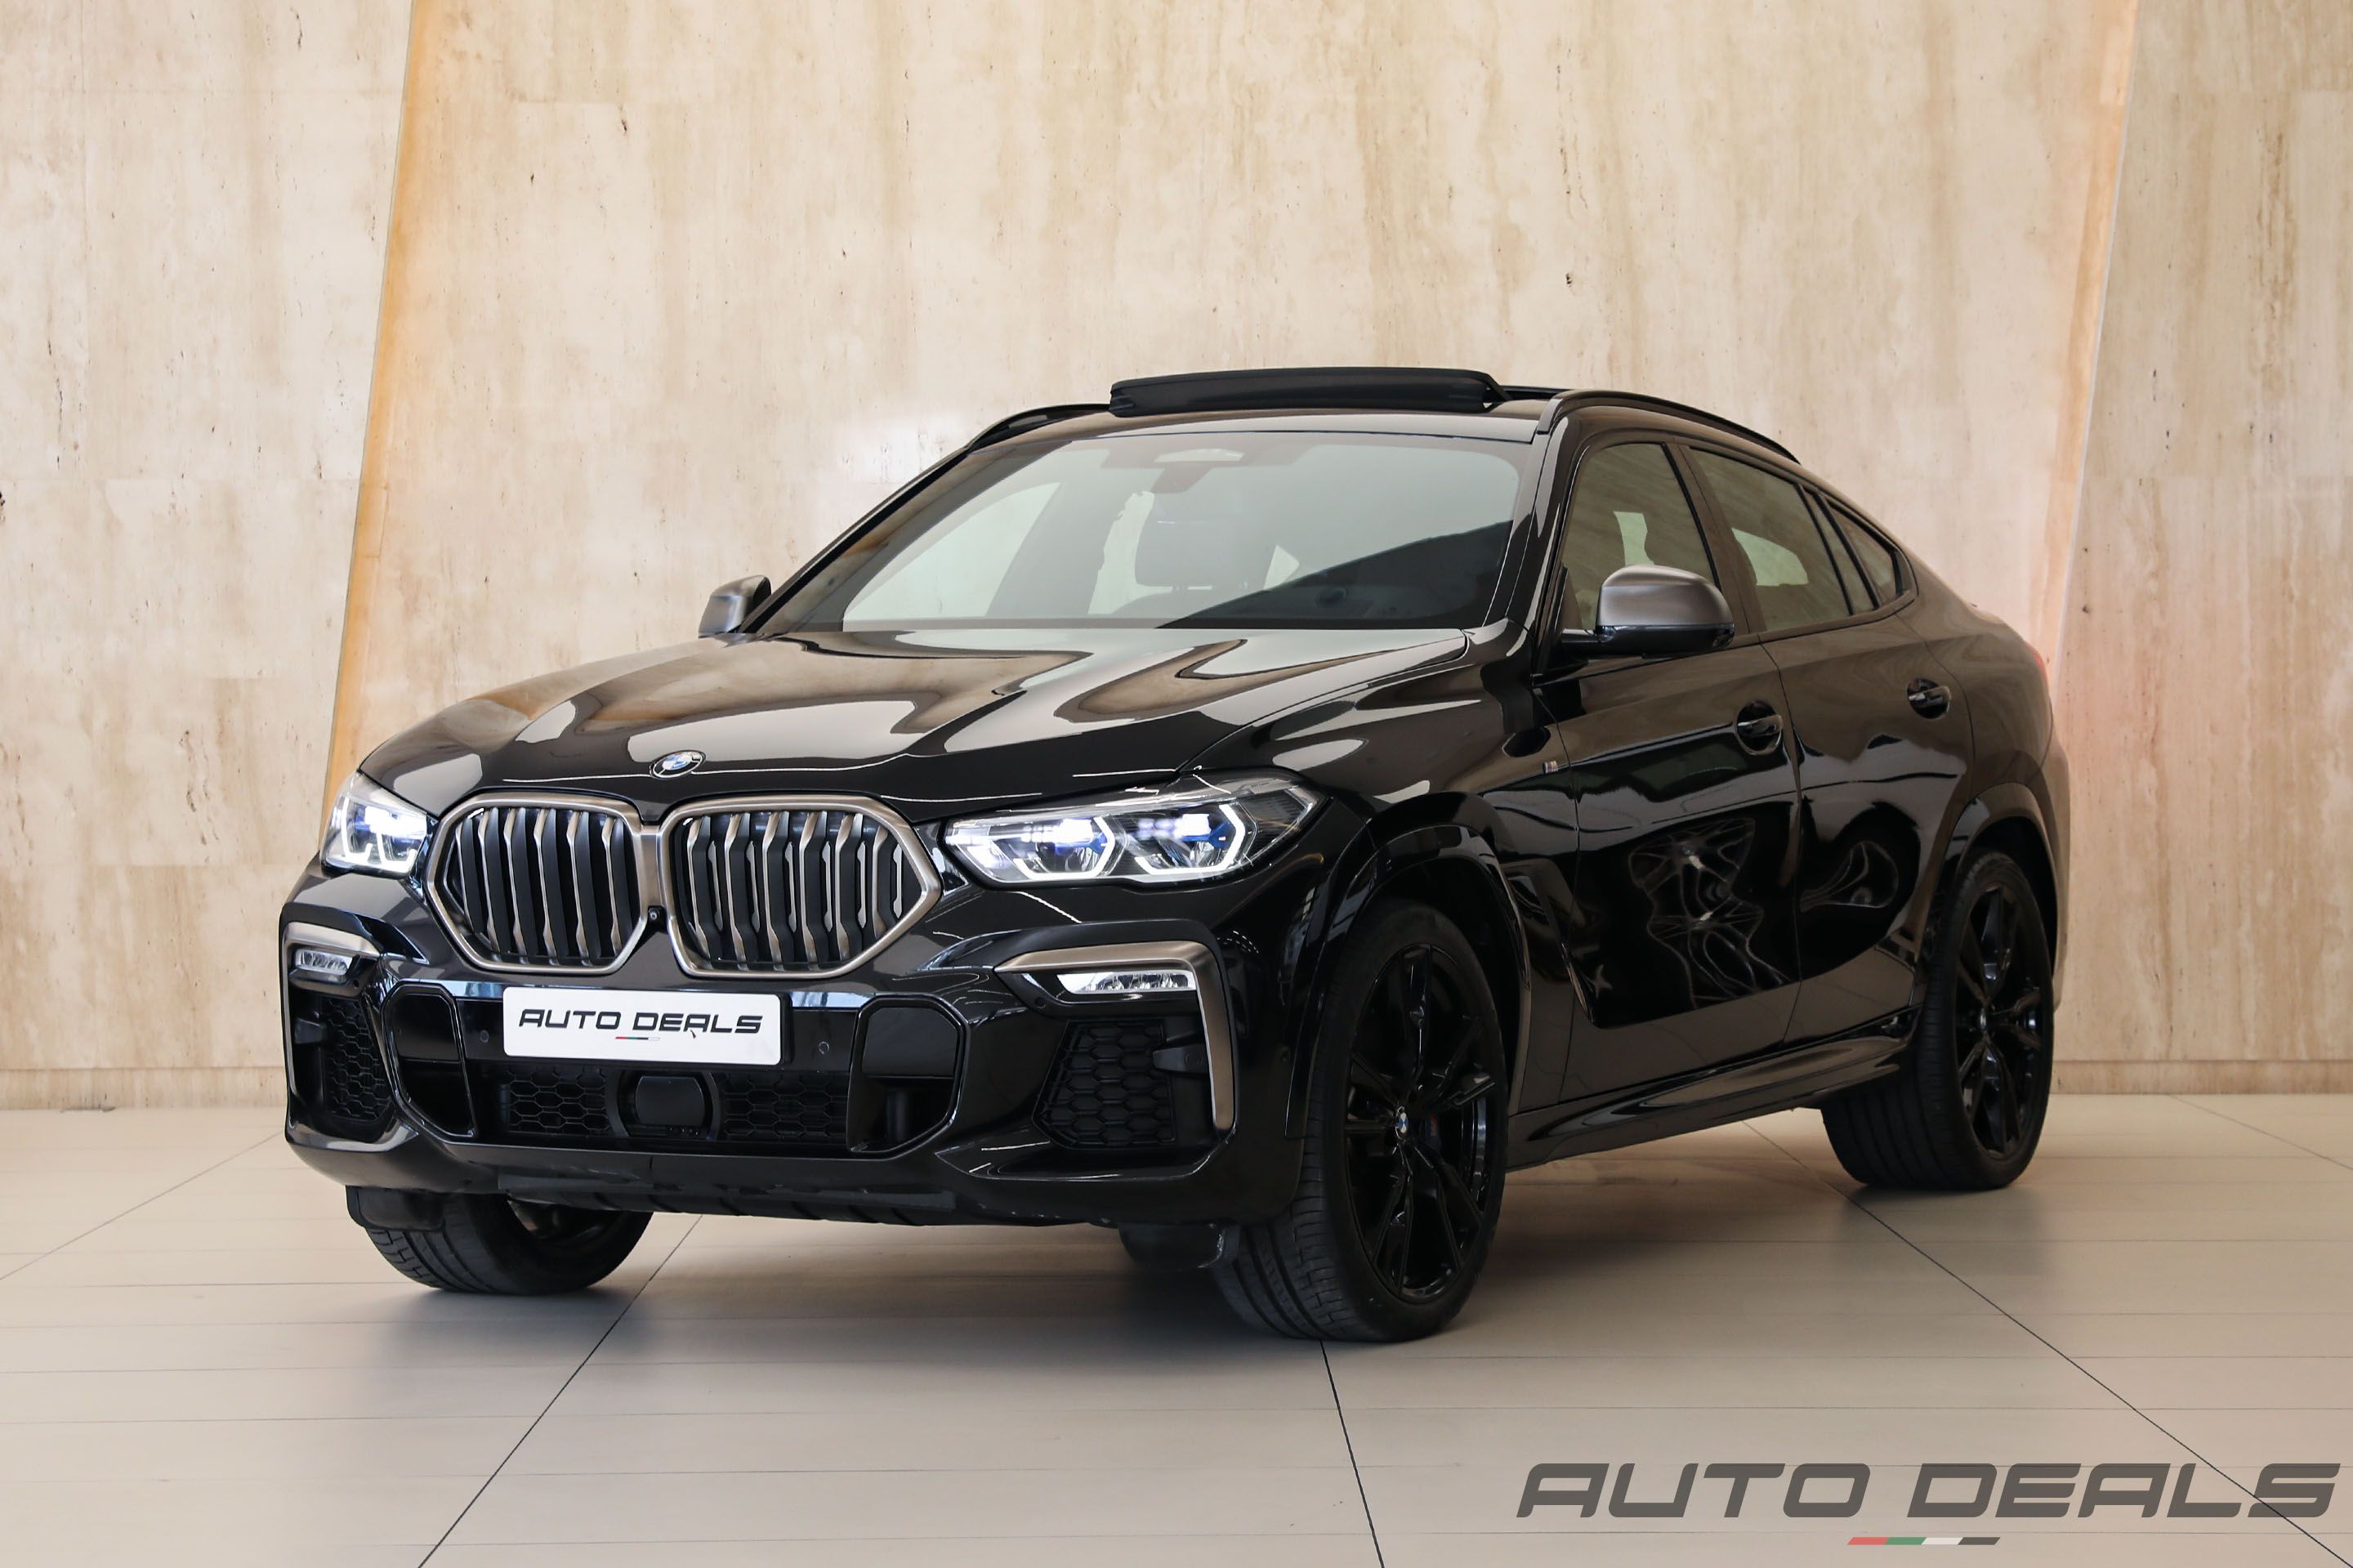 BMW X6 M 50i | 2021 - Warranty - Well Maintained - Full Options - Excellent Condition | 4.4L V8